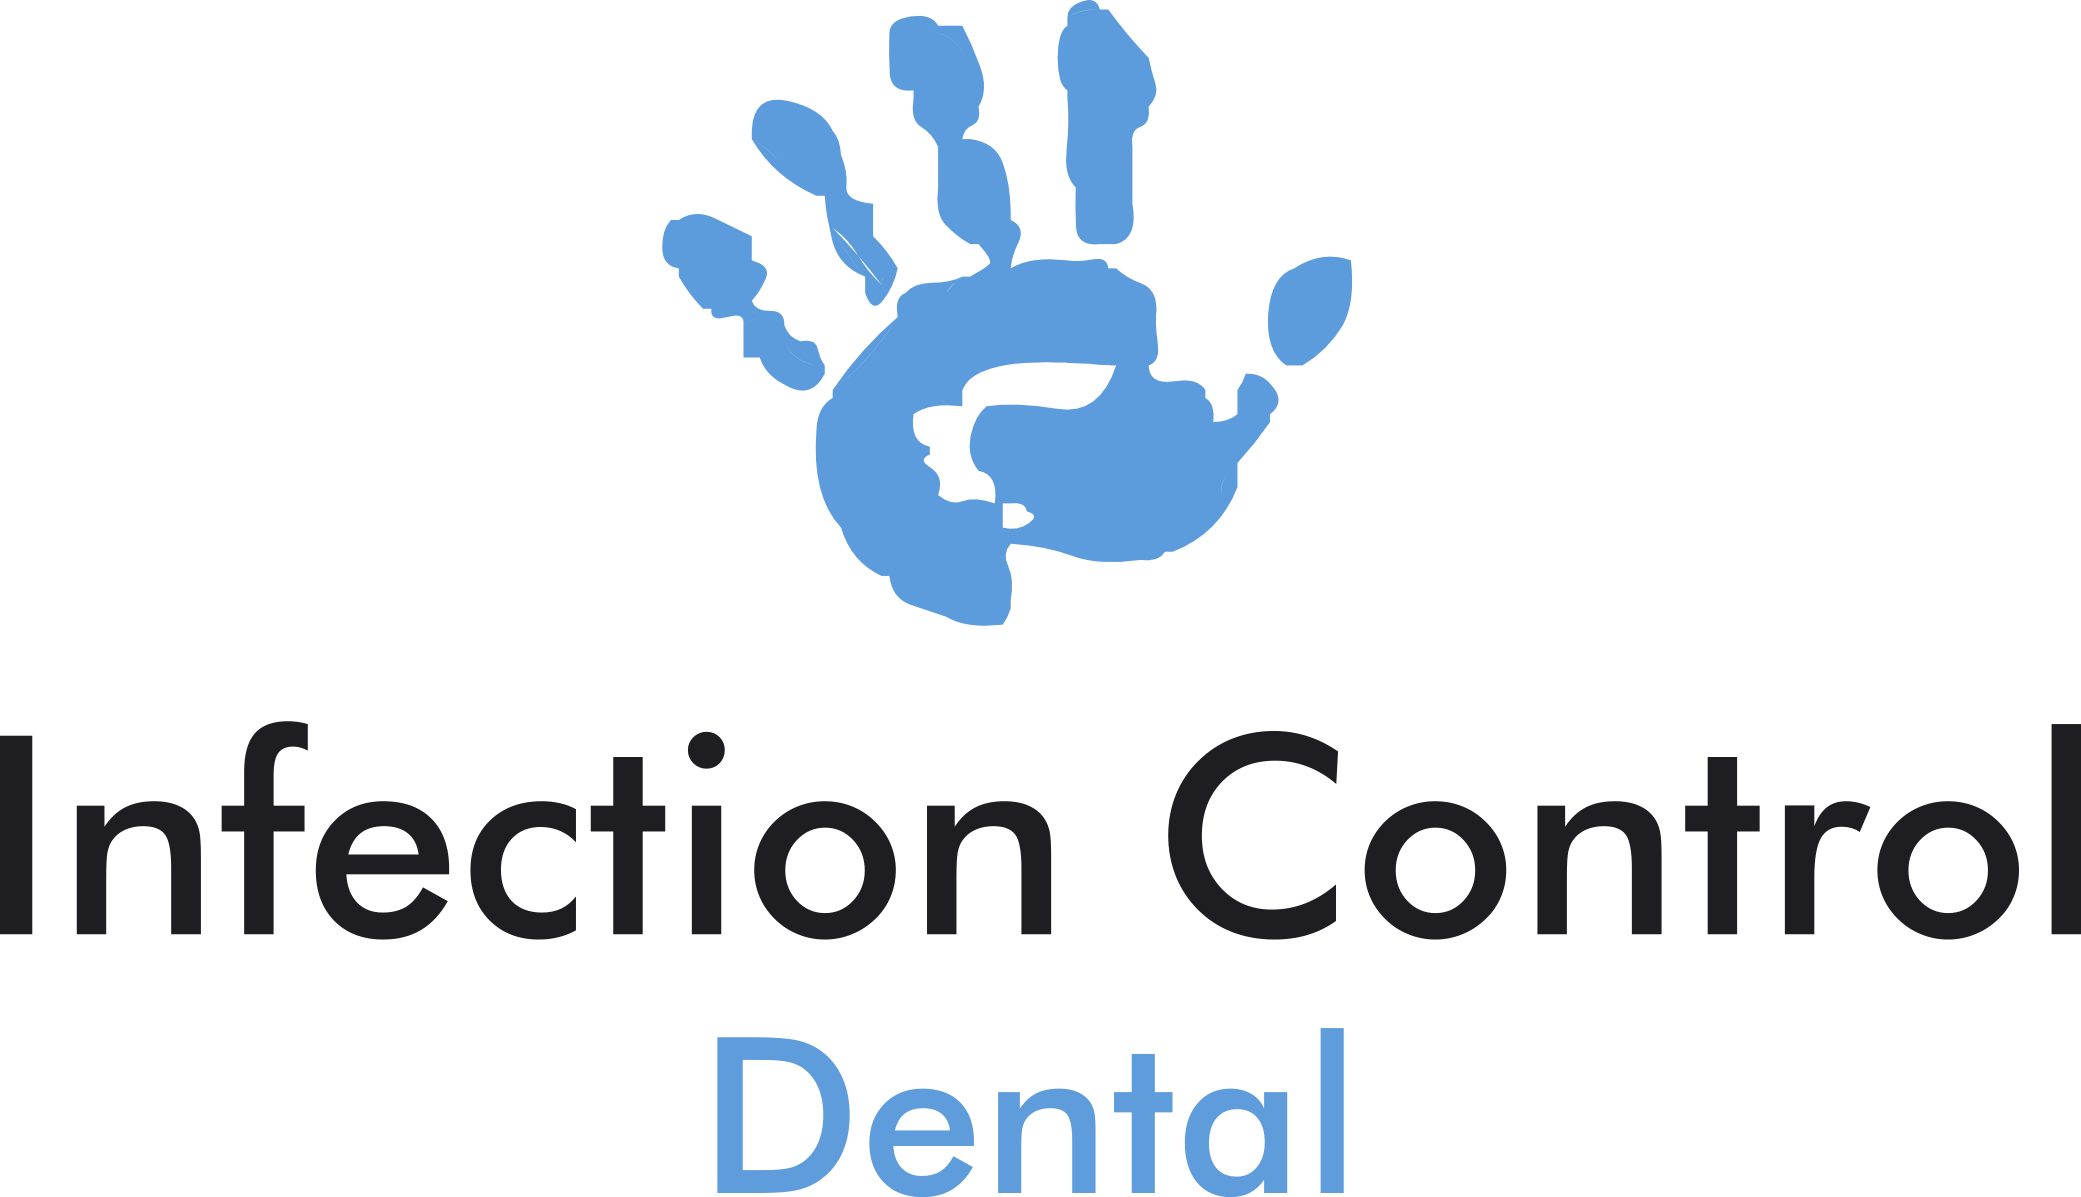 Infection Control Logo - Infection Control Dental